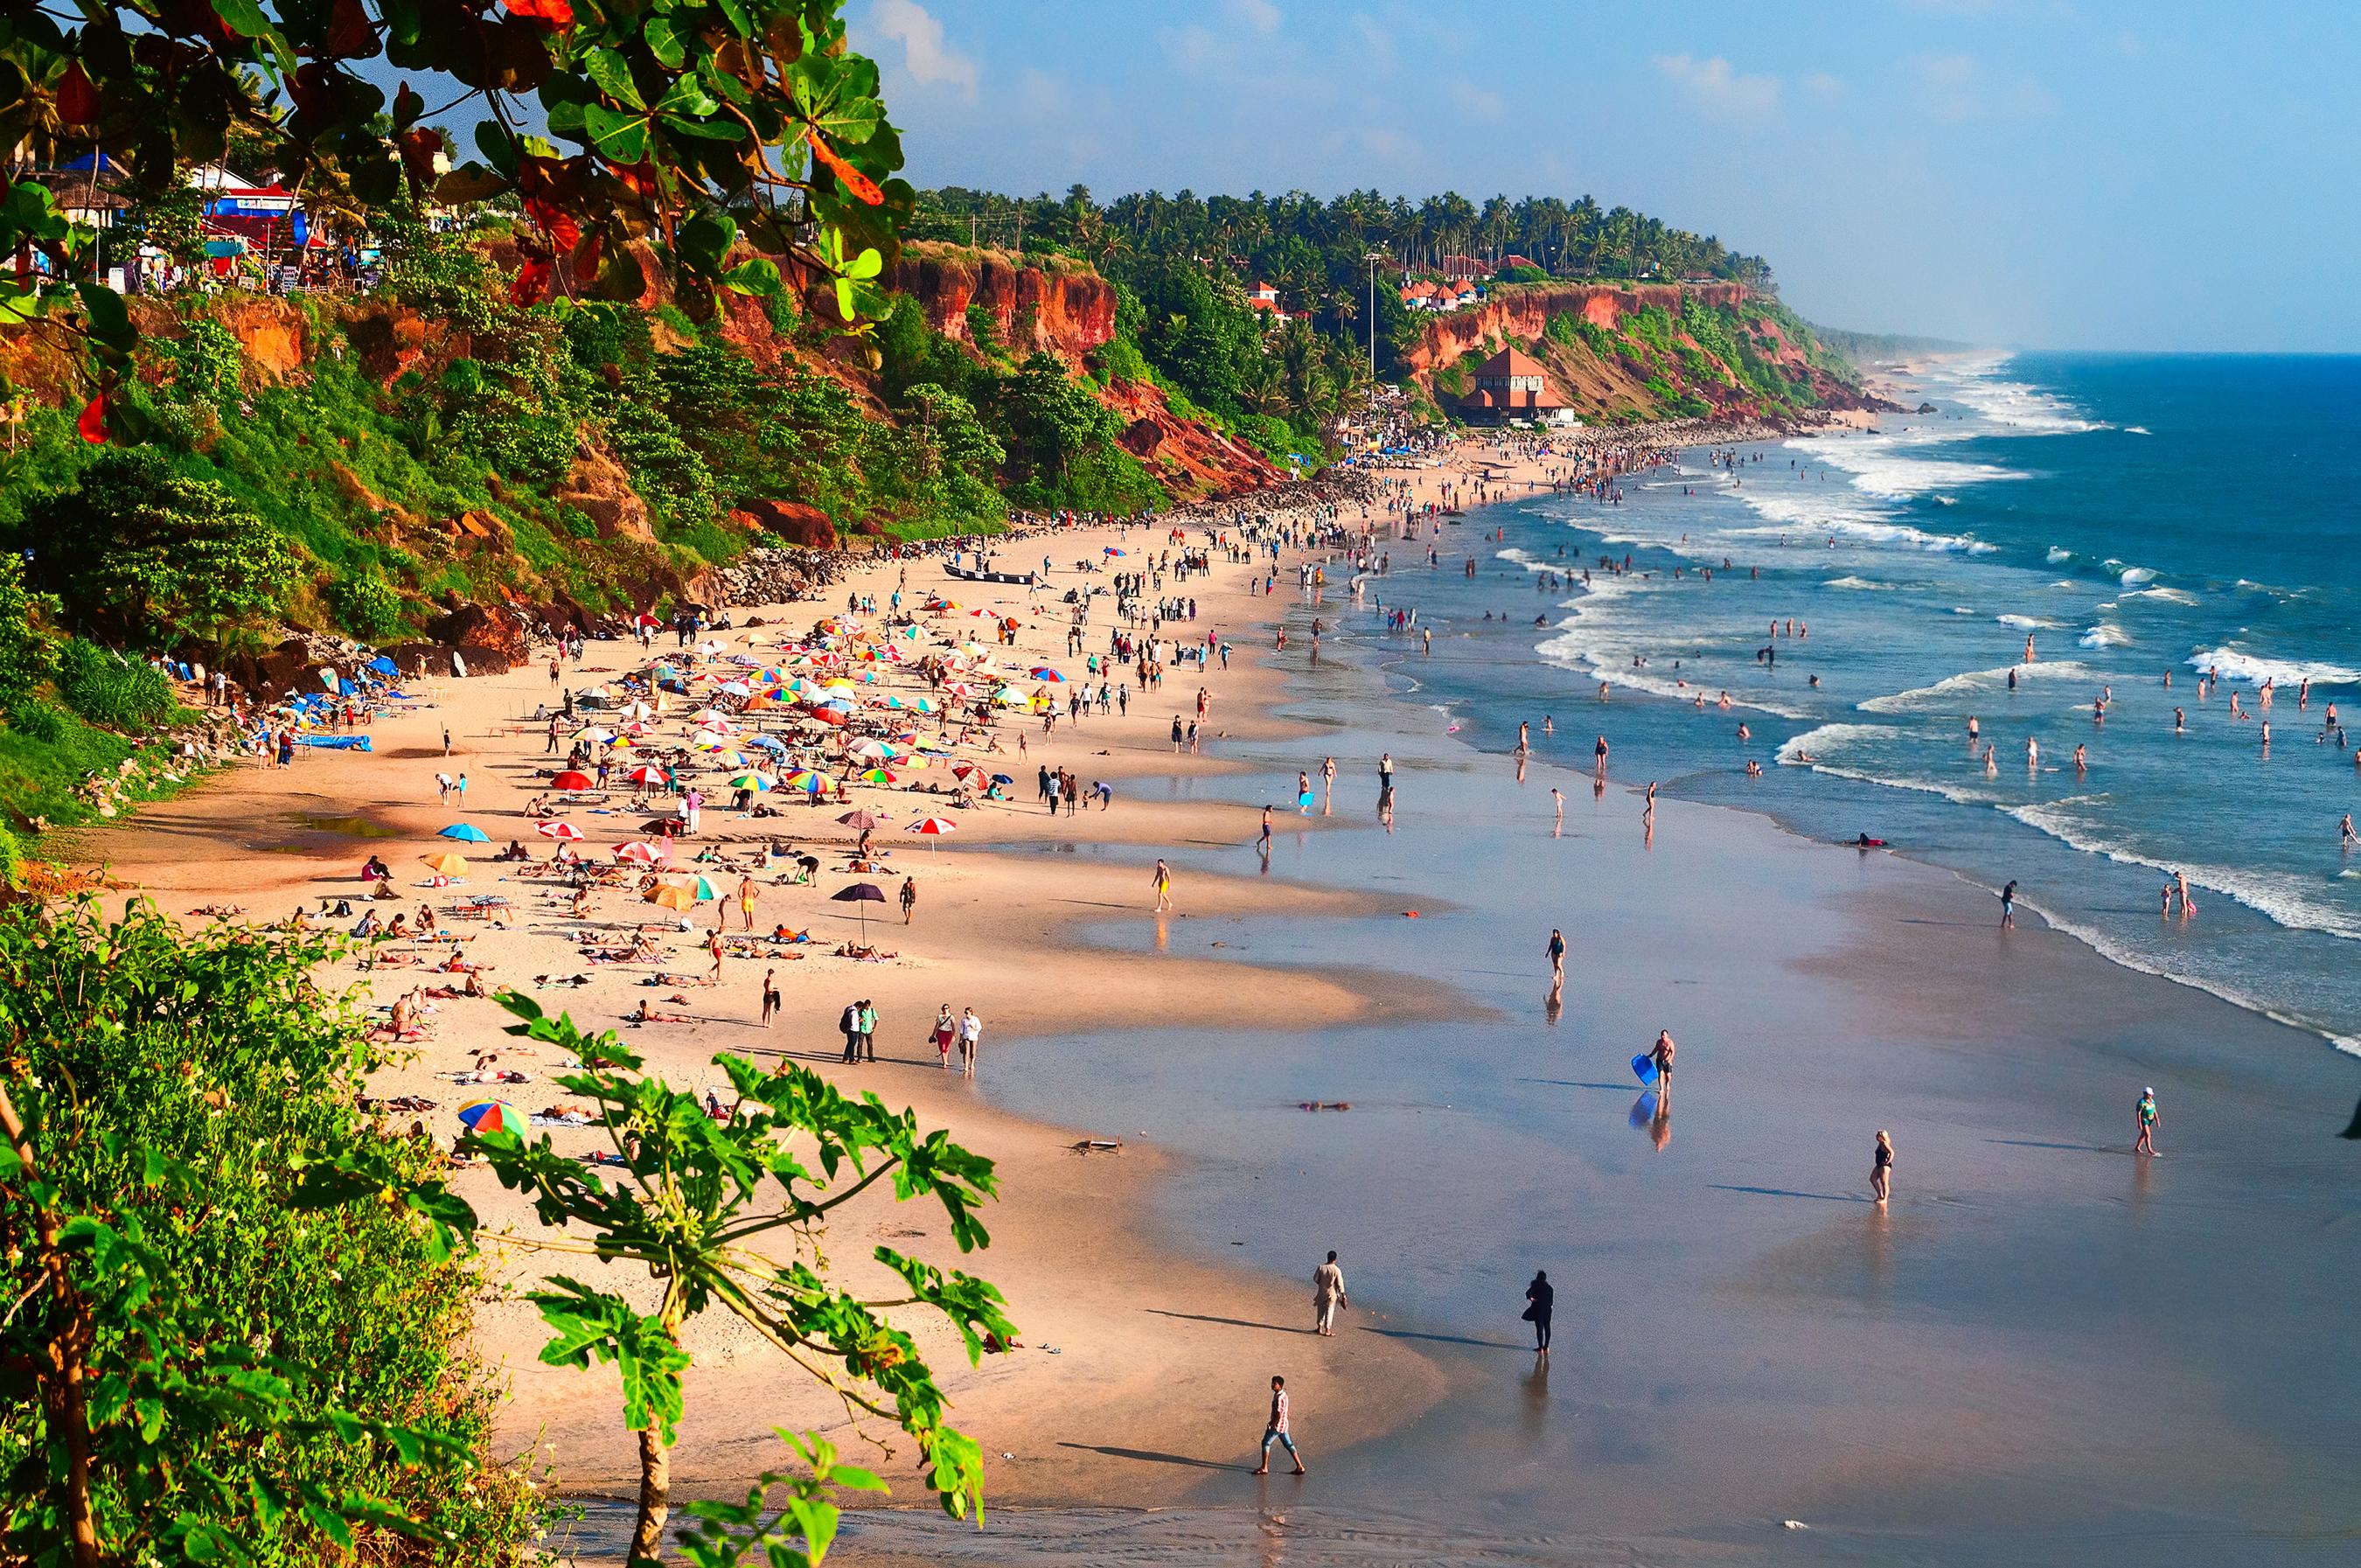 tourist destination in india famous for its beaches